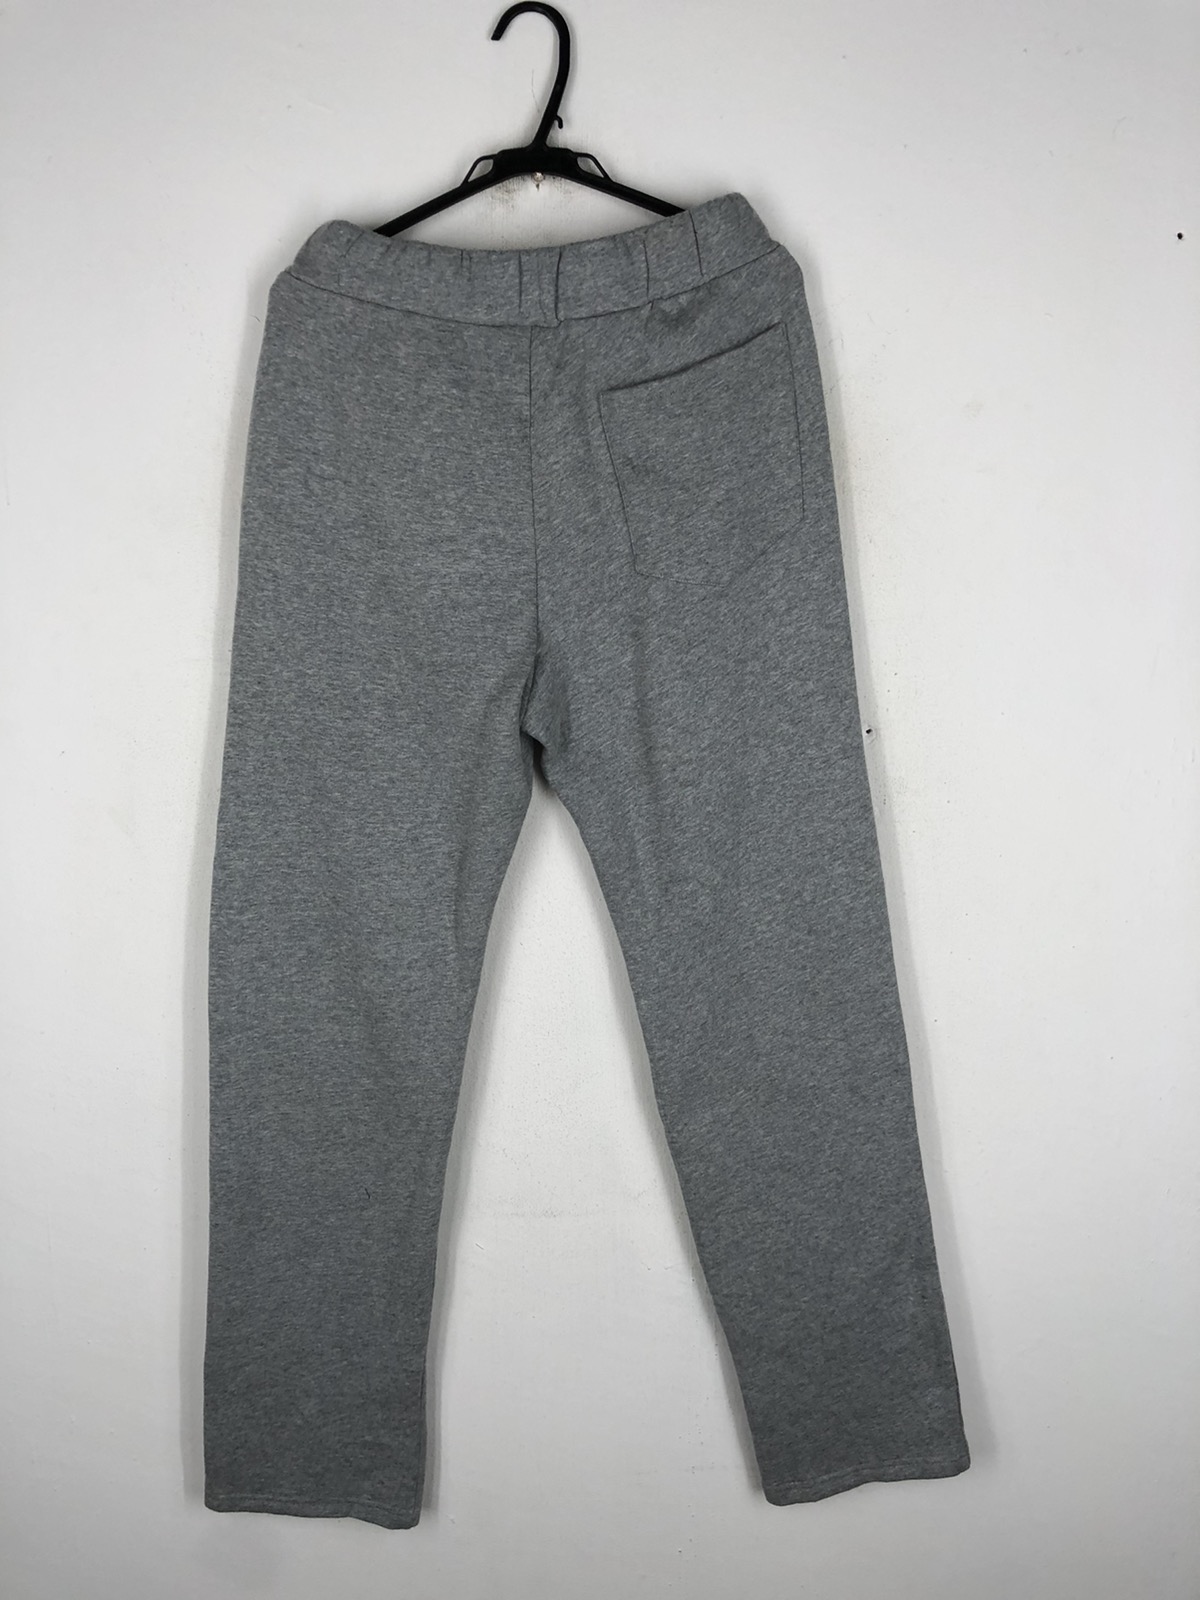 THE NORTH FACE SWEATPANTS - 6